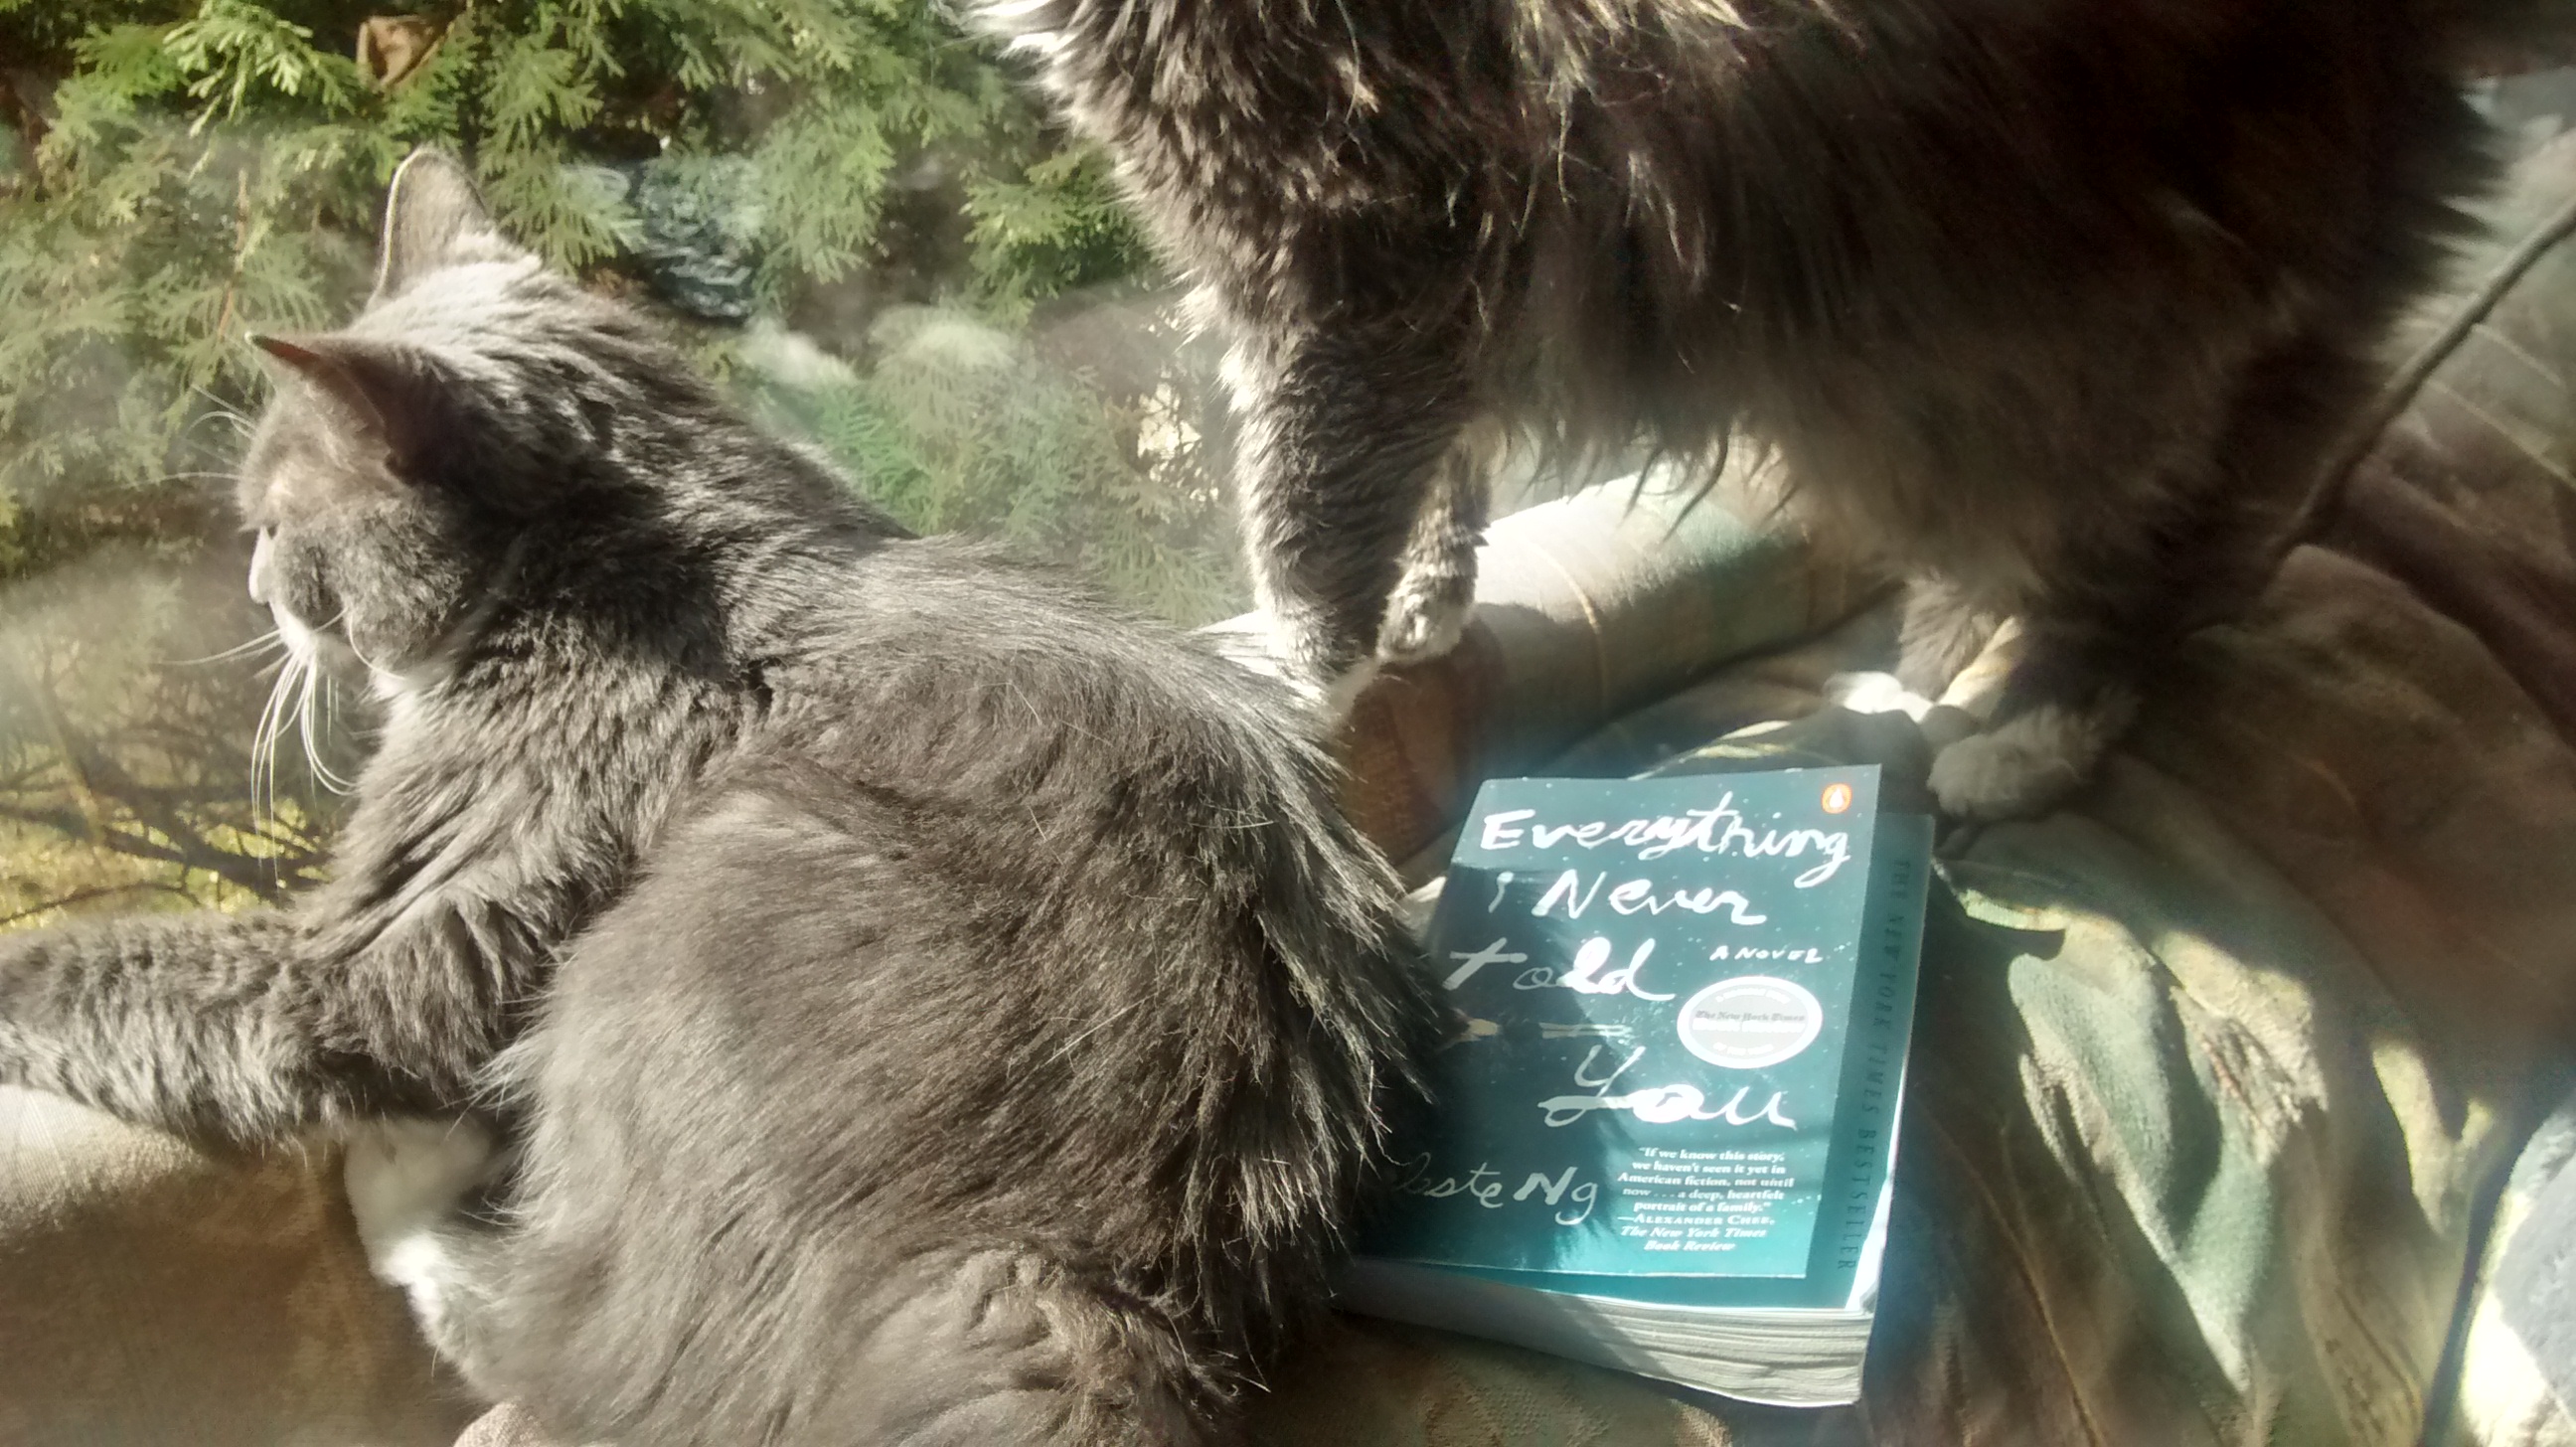 Reading this book has led Smokey and Pearl to contemplate their mom's decision to not return to work